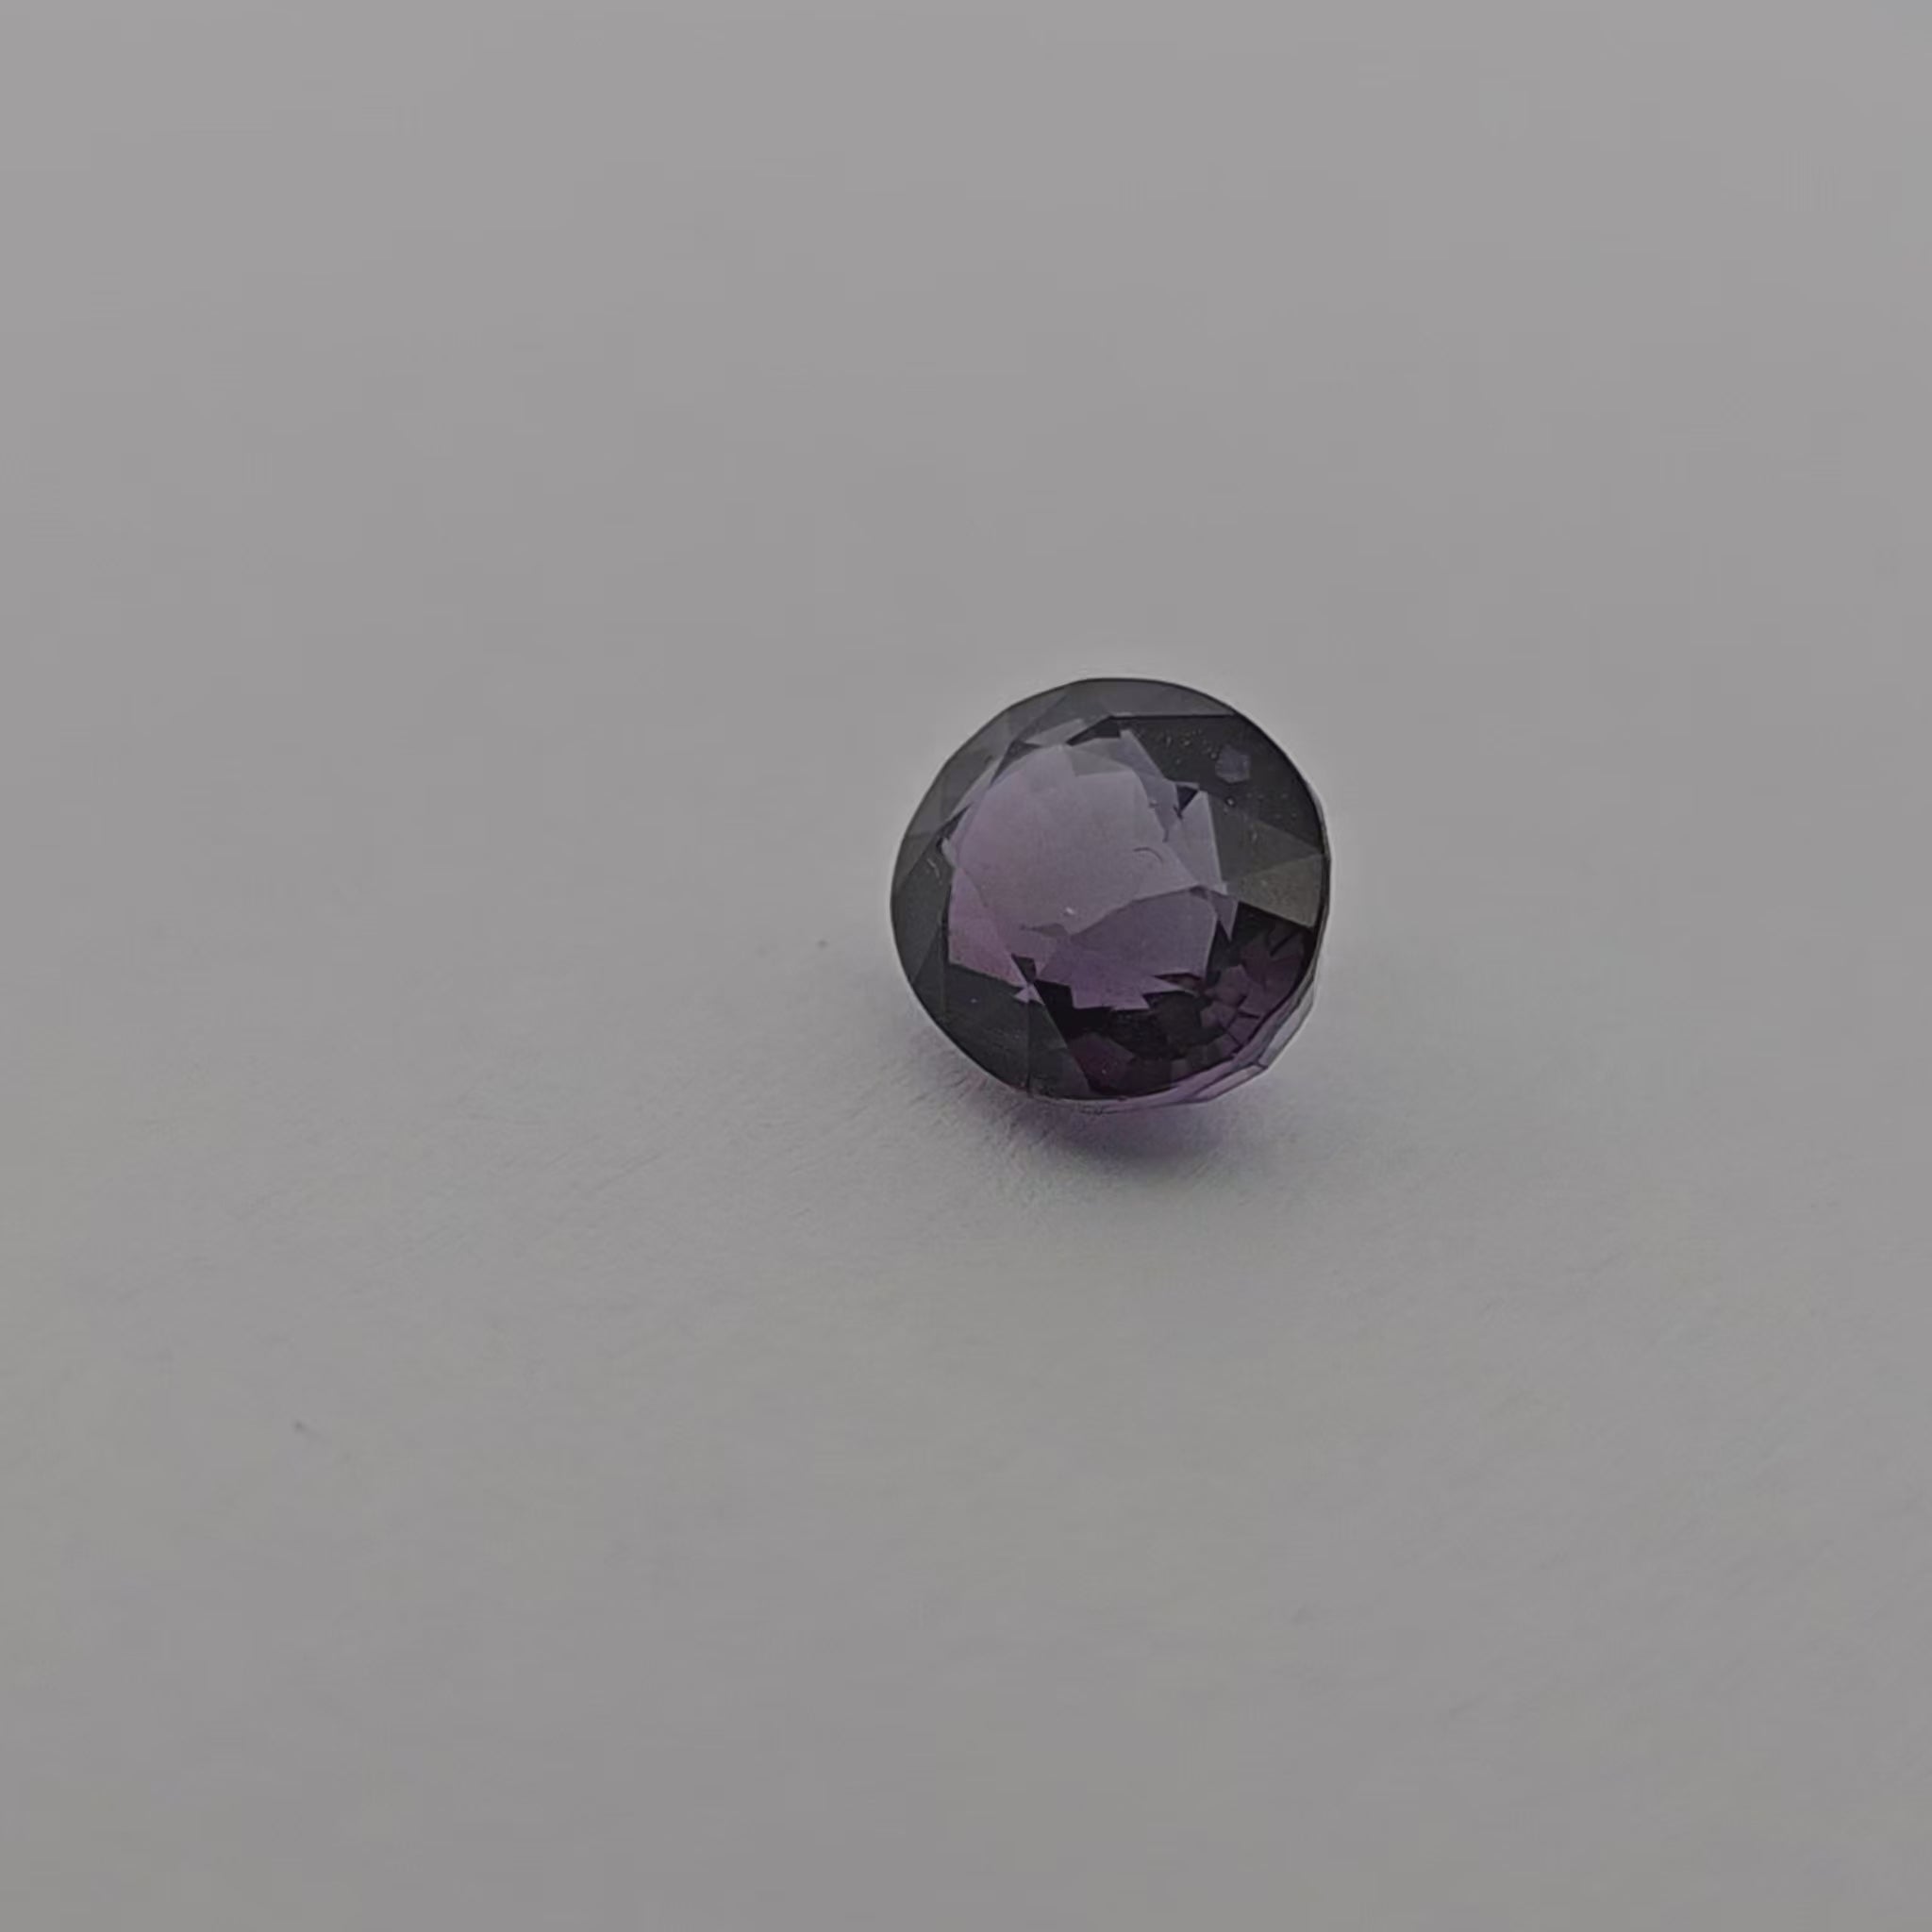 Natural Purple Spinel Stone 2.31 Carats Oval Cut (8.2 x 7 mm)